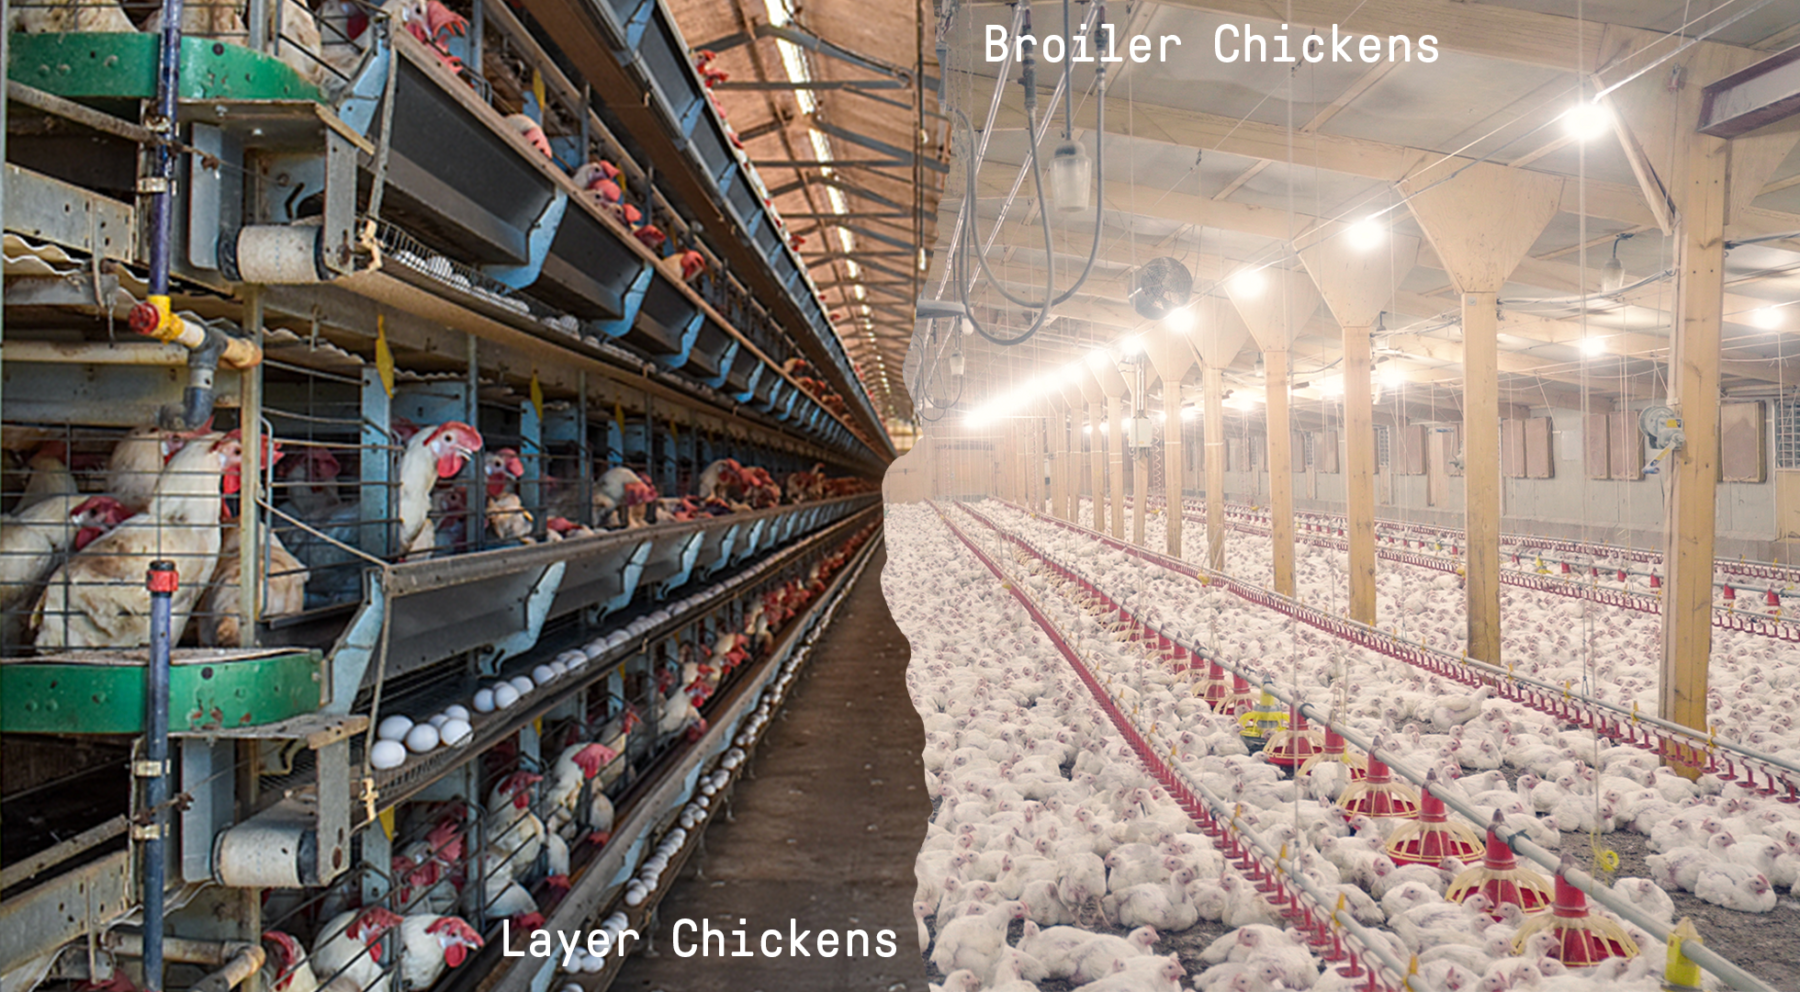 layer chickens versus broiler chickens